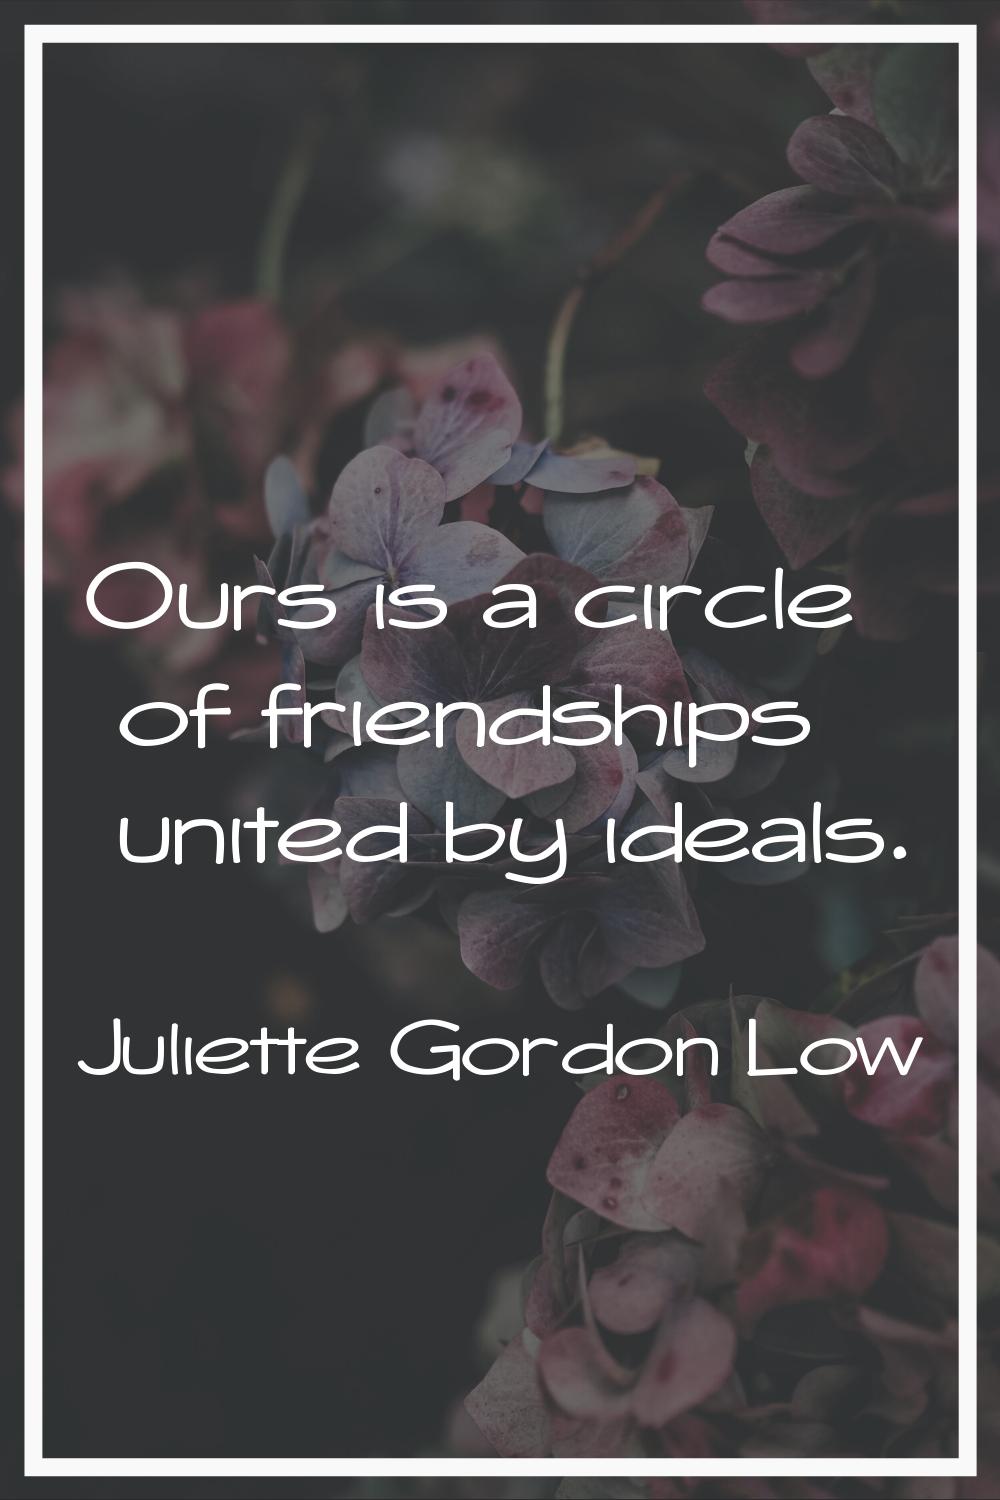 Ours is a circle of friendships united by ideals.